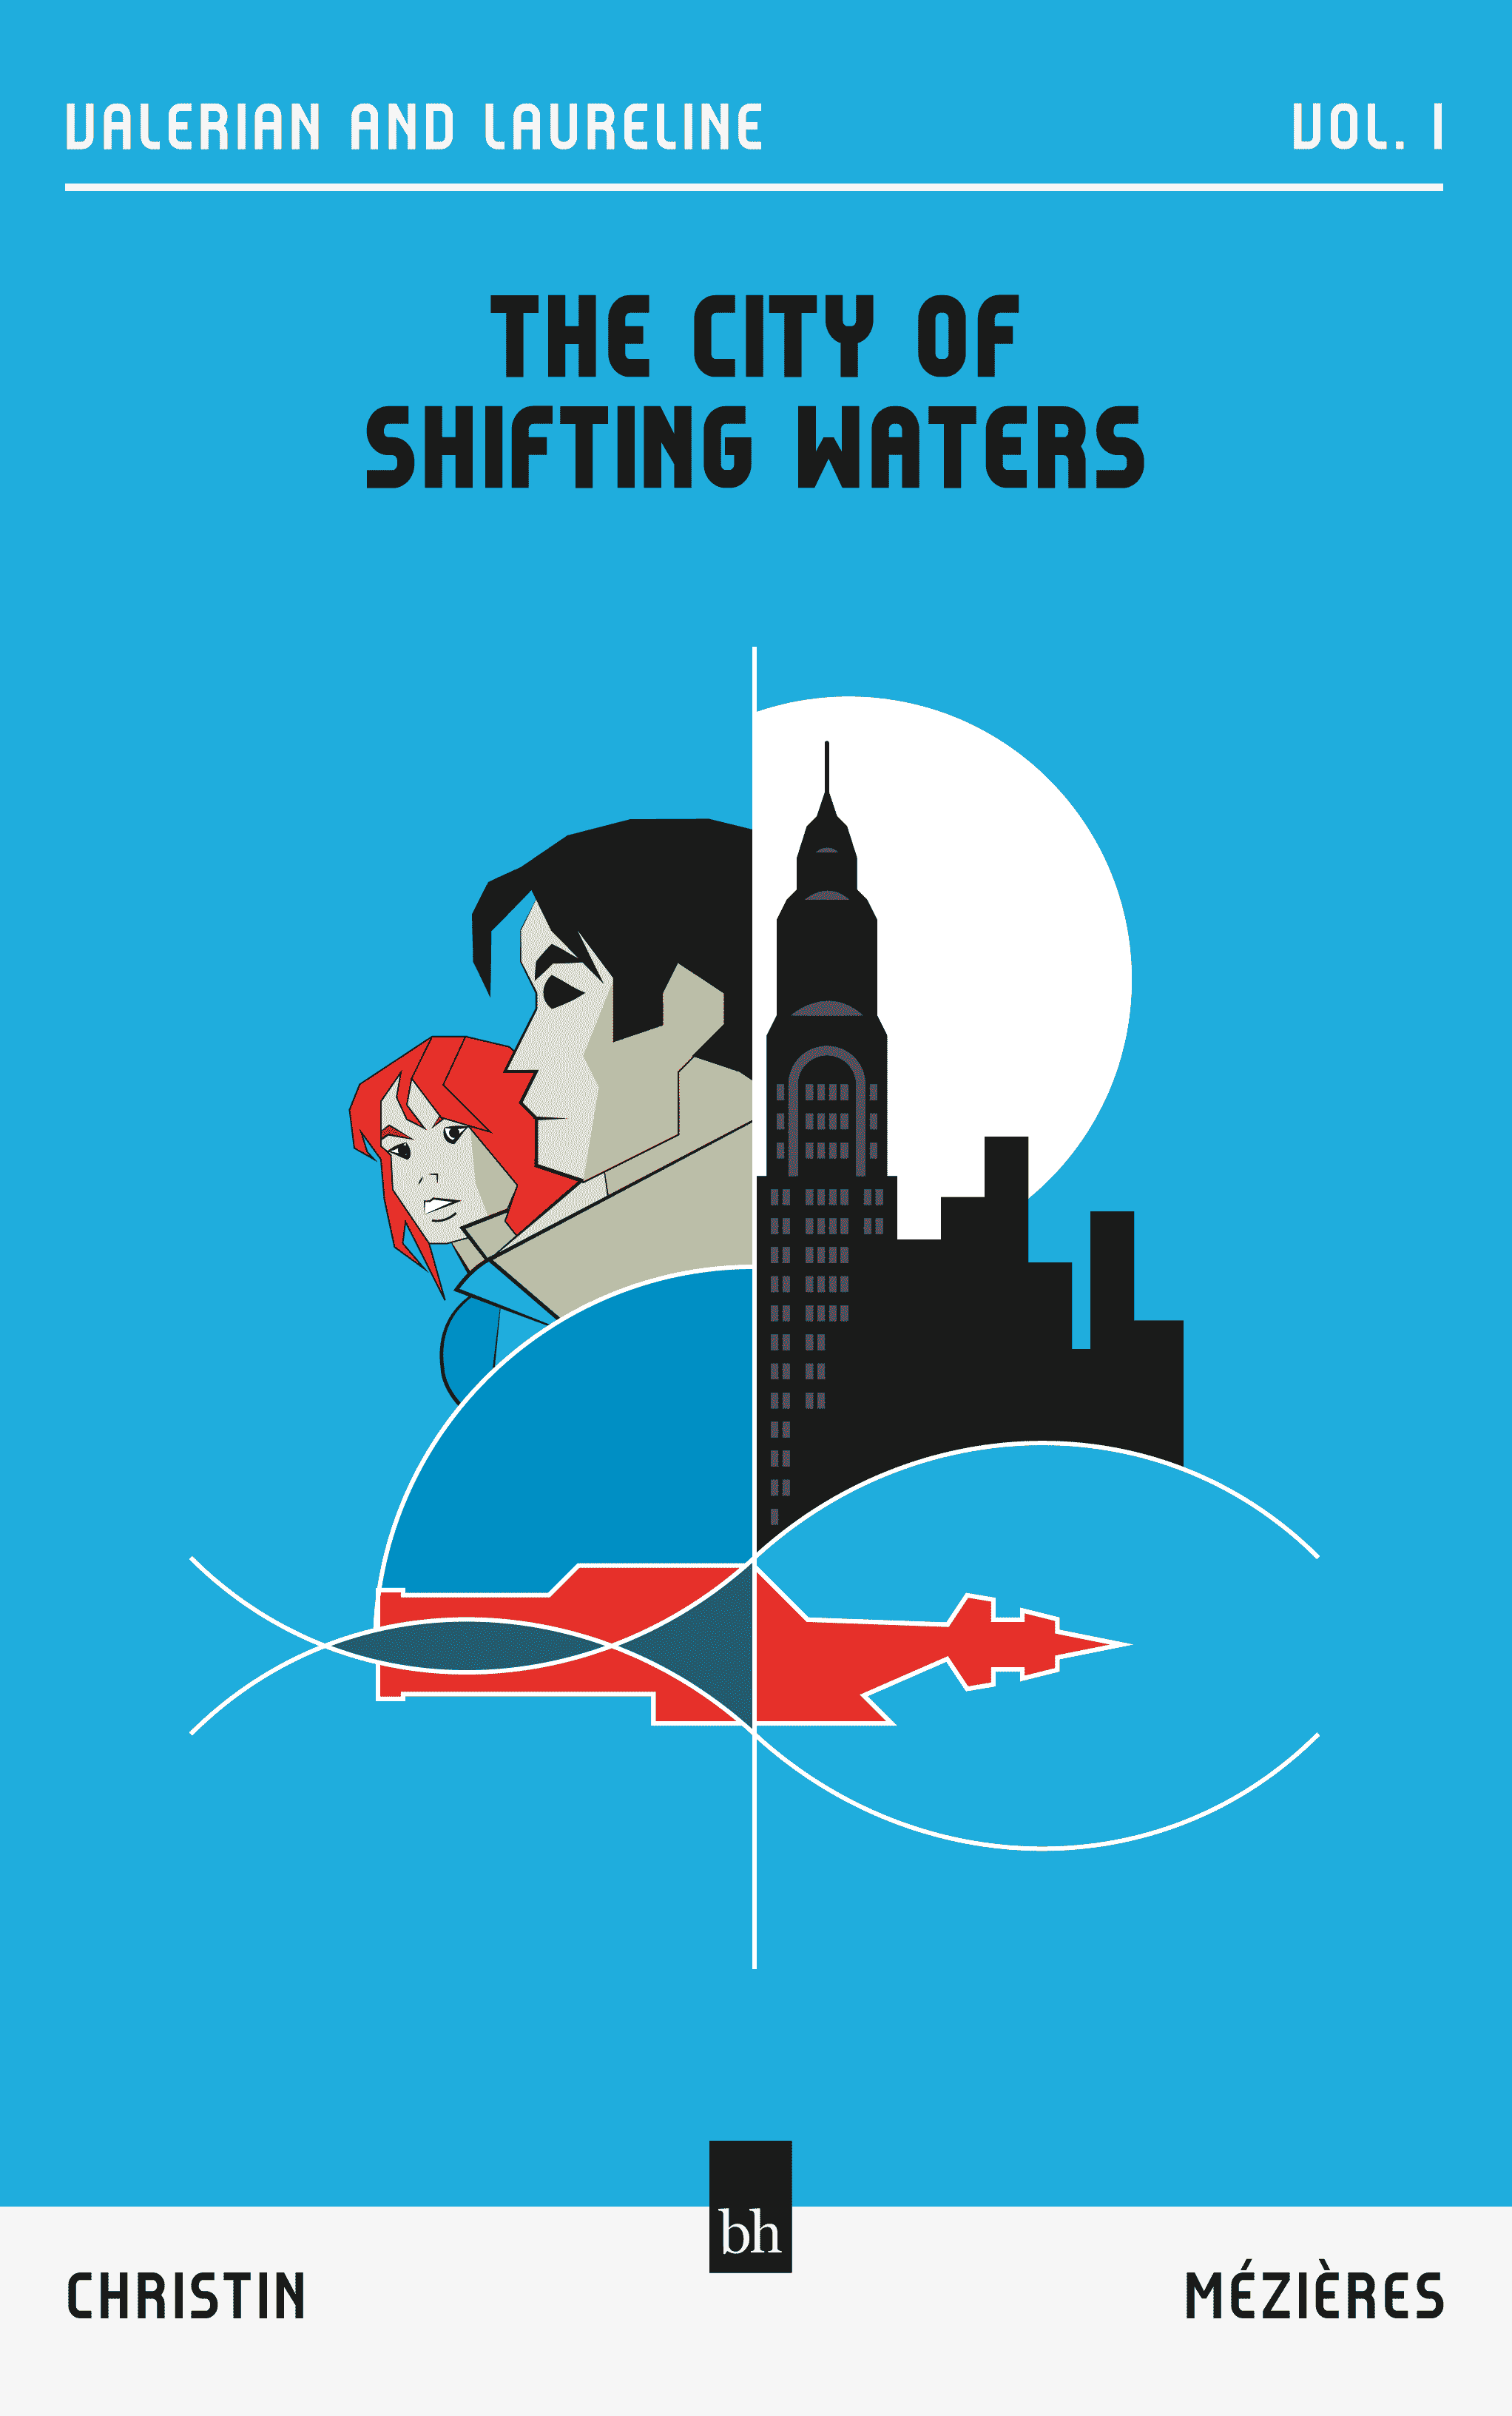 The City of Shifting Waters (Valerian and Laureline Vol. 1) by Pierre Christin